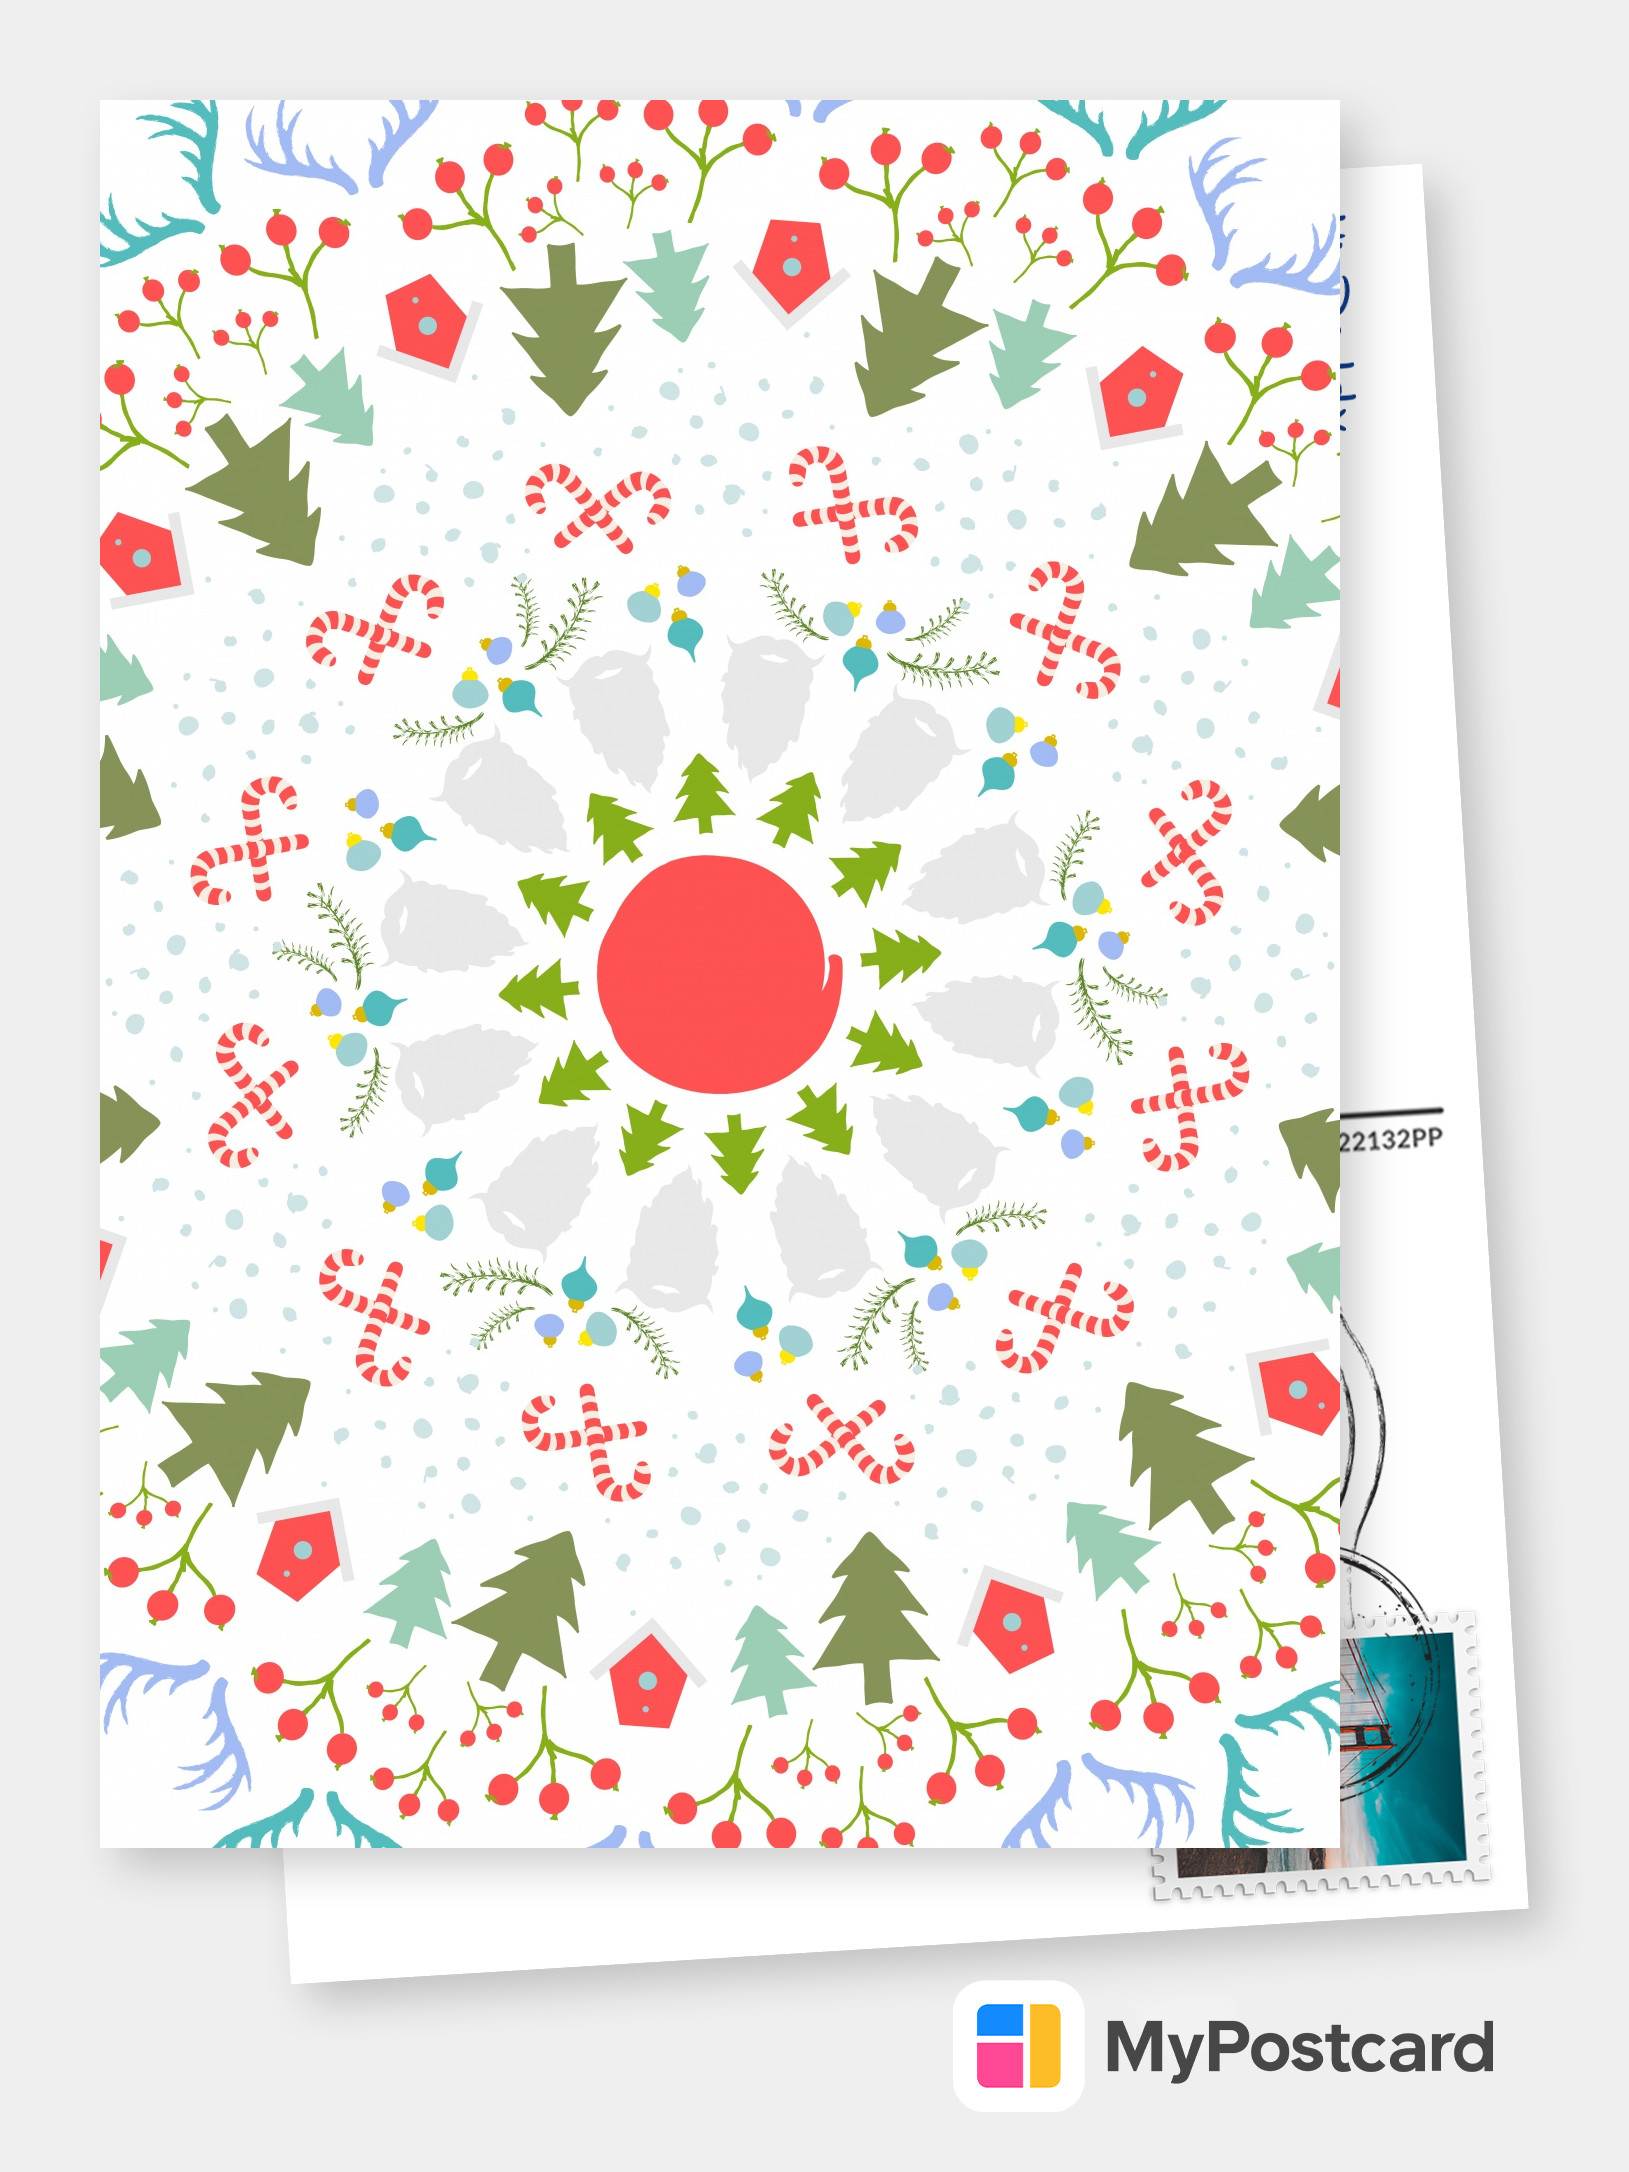 Free Printable Christmas Cards Templates Print And Mailed For You Online Printed Christmas Cards We Print Your Christmas Cards And Mail Them Internationally